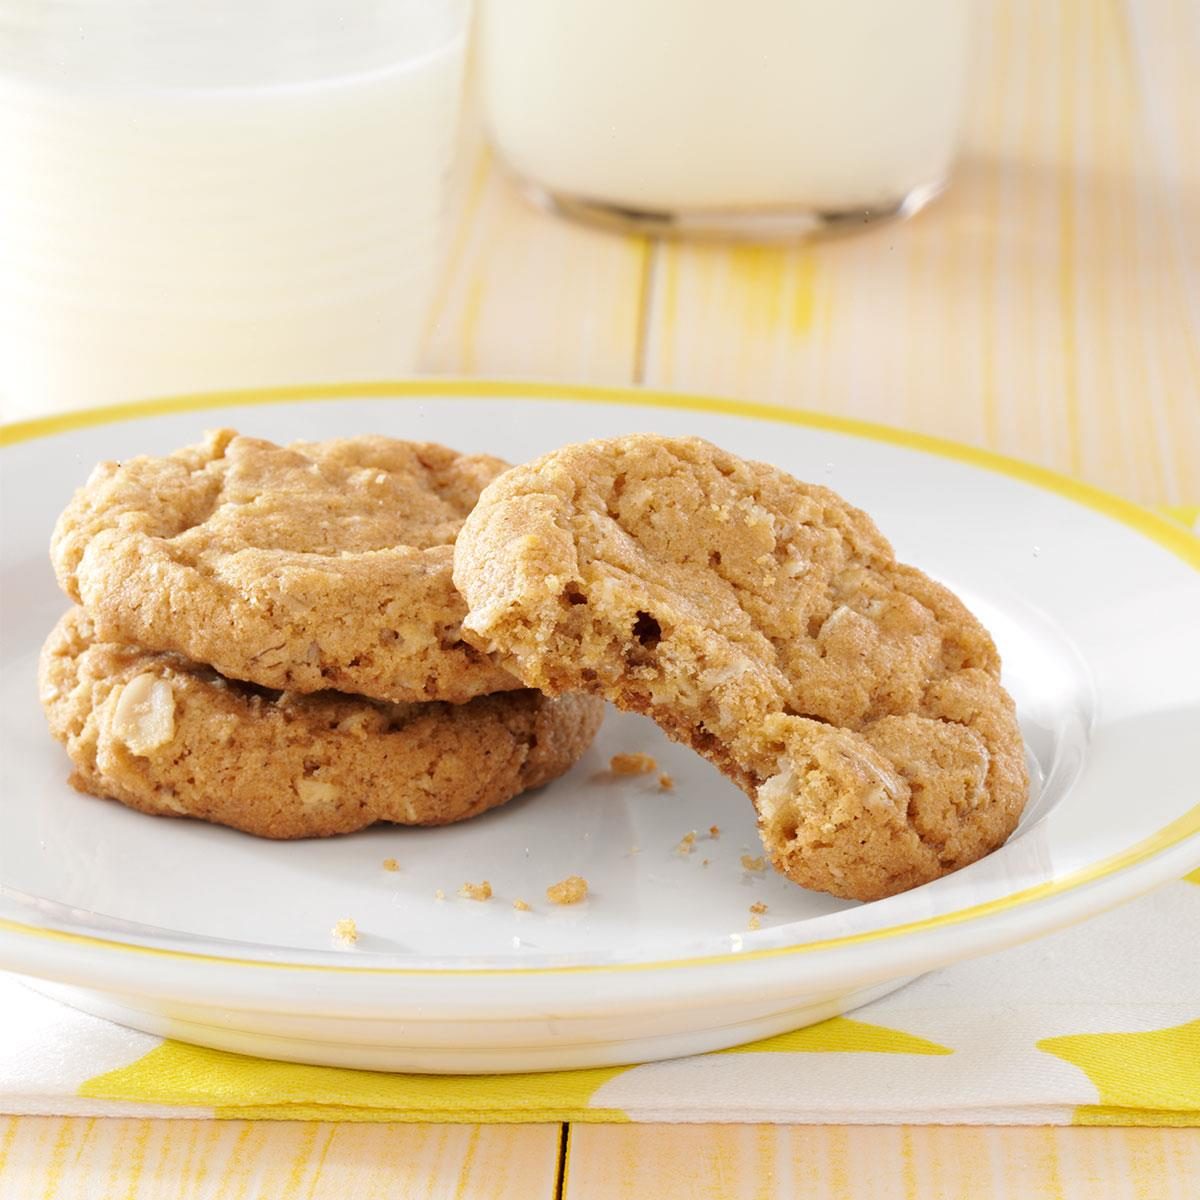 Spiced Oatmeal Cookies Recipe: How to Make It